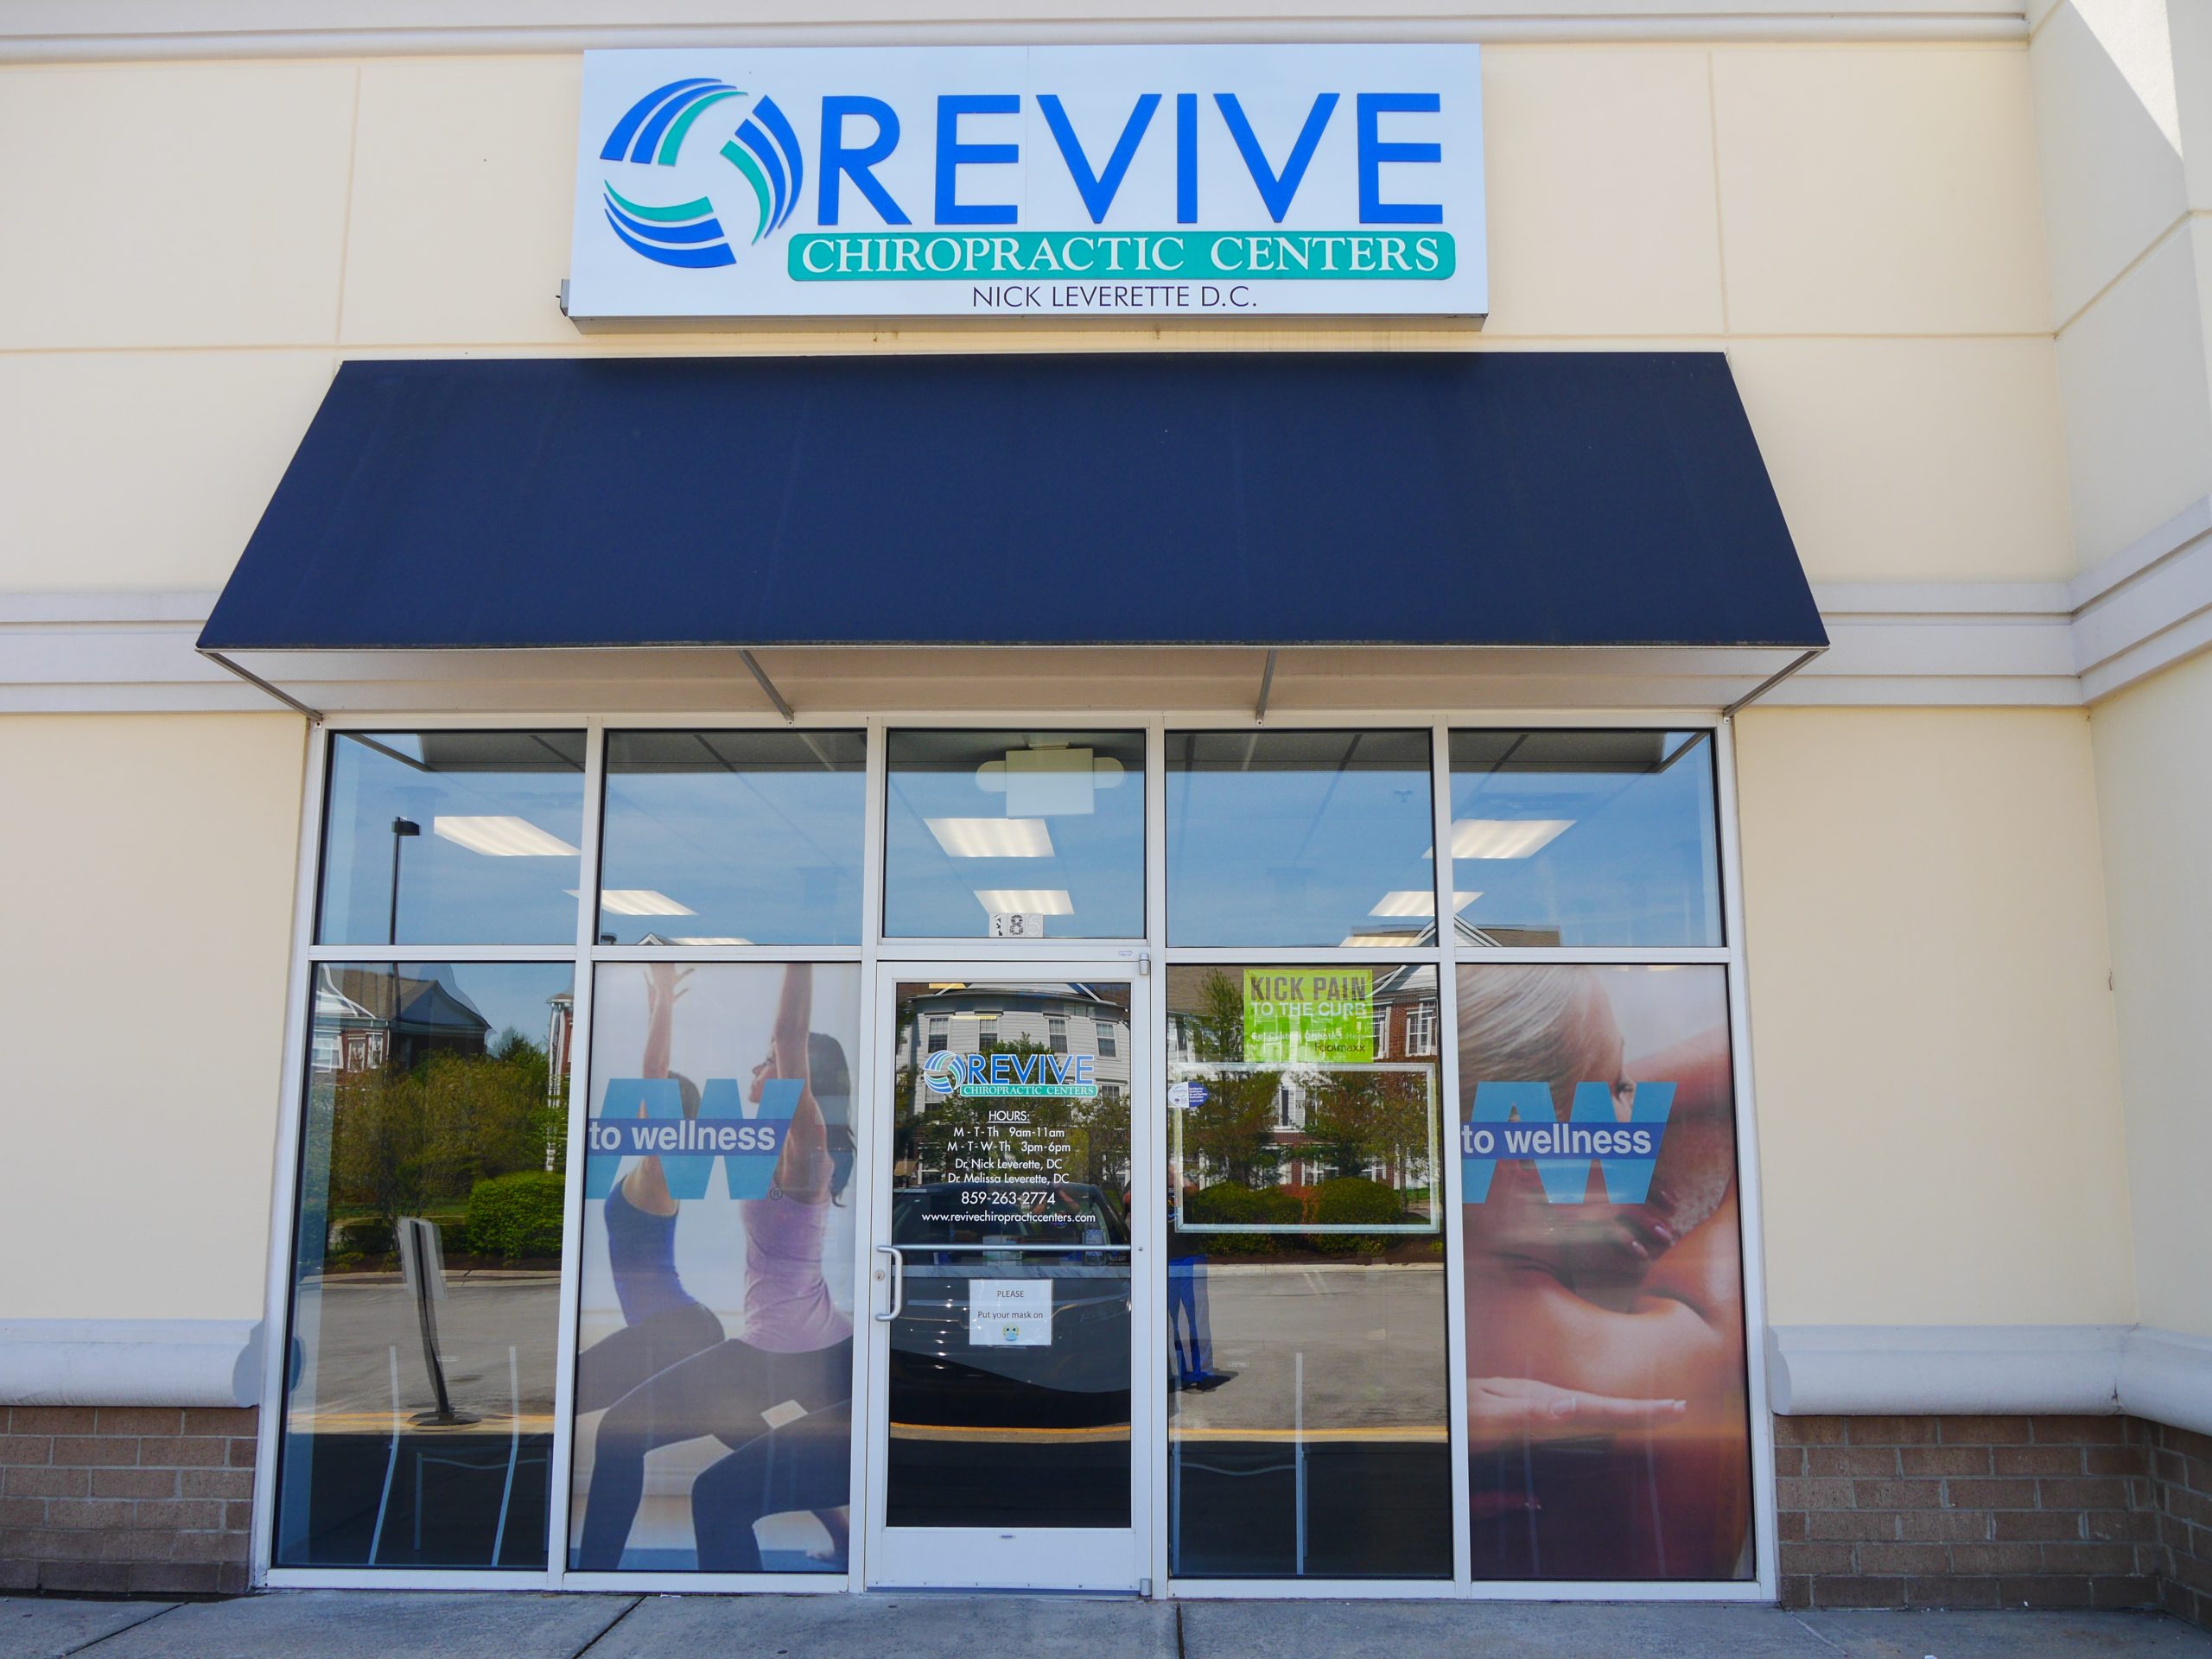 Revive Chiropractic Centers